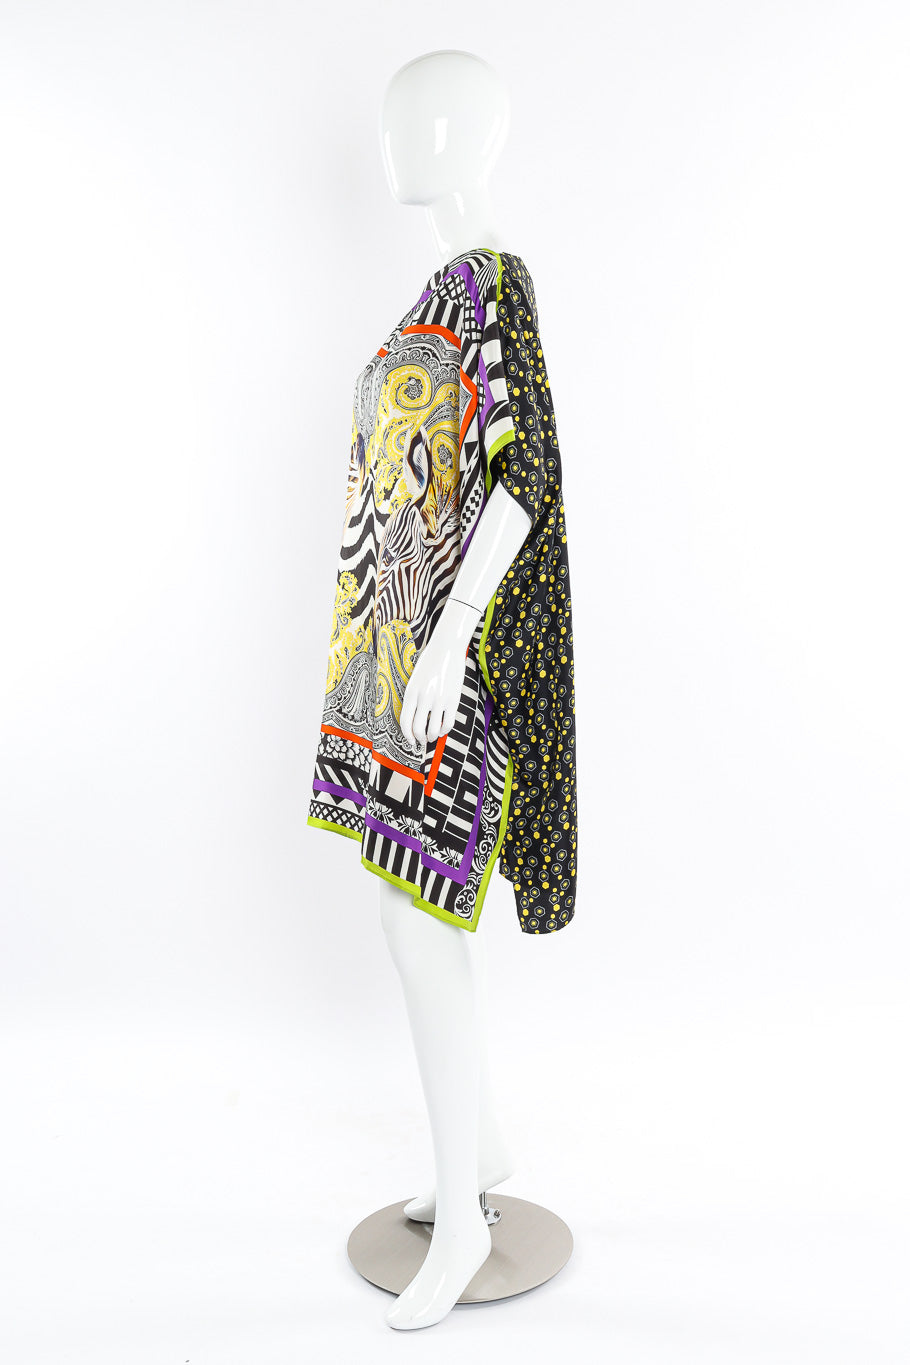 Poncho scarf top by Etro mannequin full side @recessla